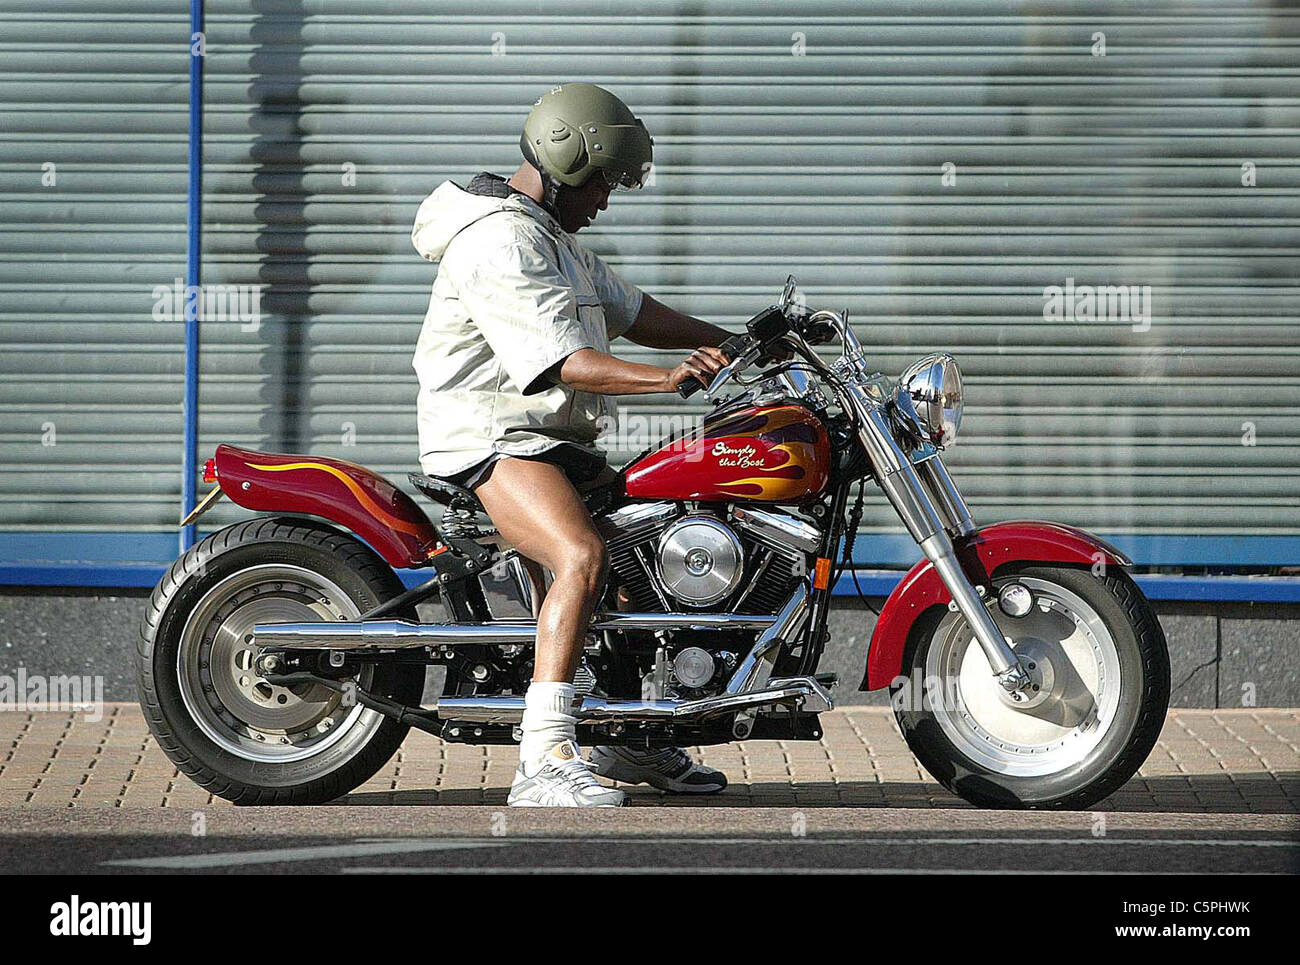 British boxer Chris Eubank on his Harley in Brighton Picture by James Boardman. Stock Photo